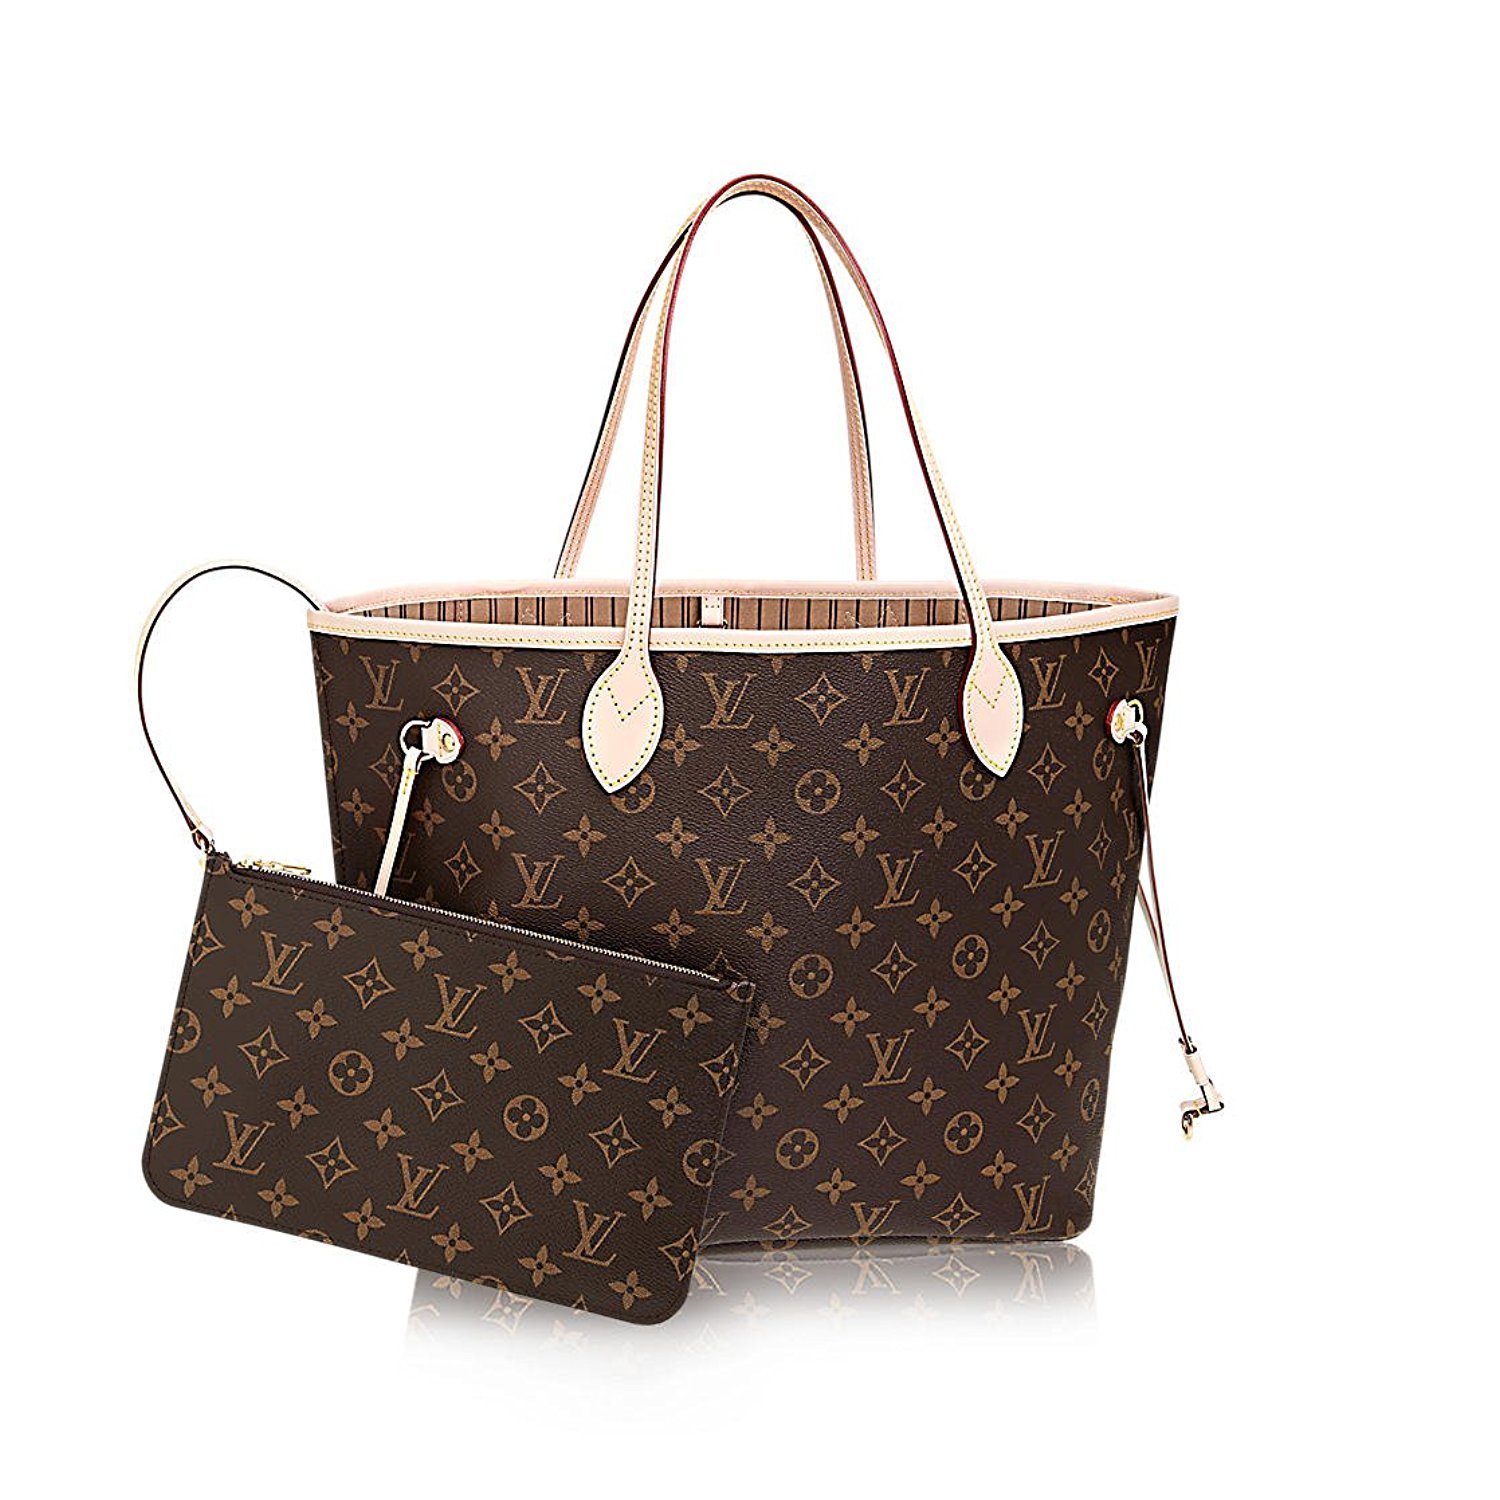 Are there any reliable websites for purchasing replica Louis Vuitton bags?  - Quora